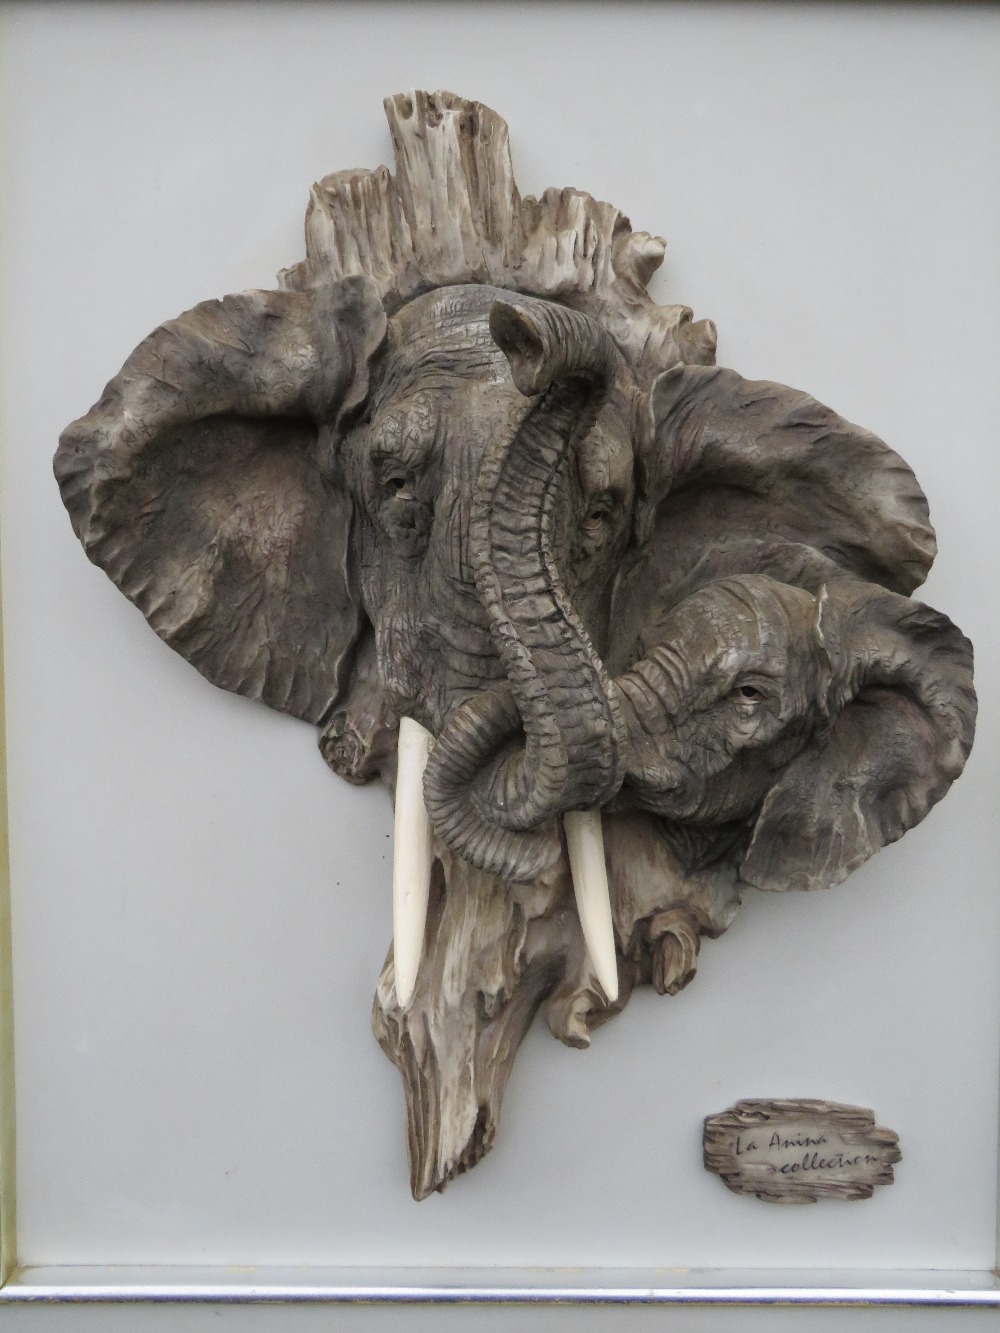 CROSA (XXI) - A RESIN SCULPTURE OF TWO ENTWINED ELEPHANT HEADS FORMING THE SHAPE OF AFRICA,